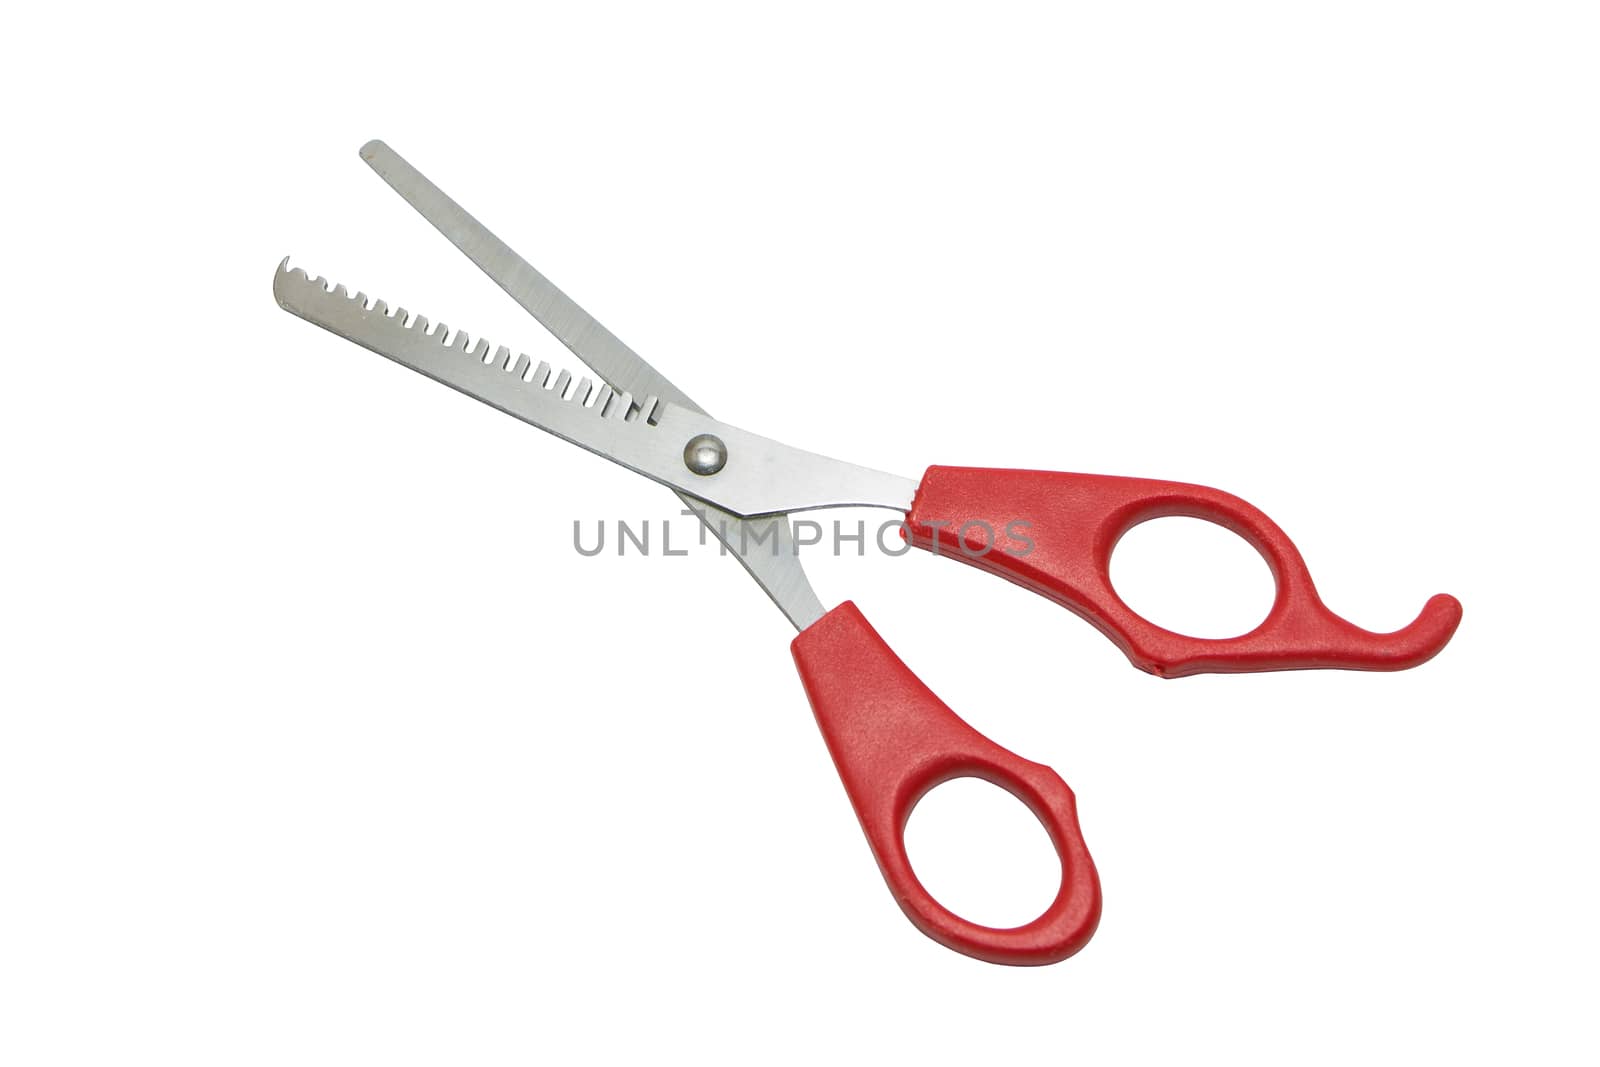 scissors isolate on white background with cliping mask.